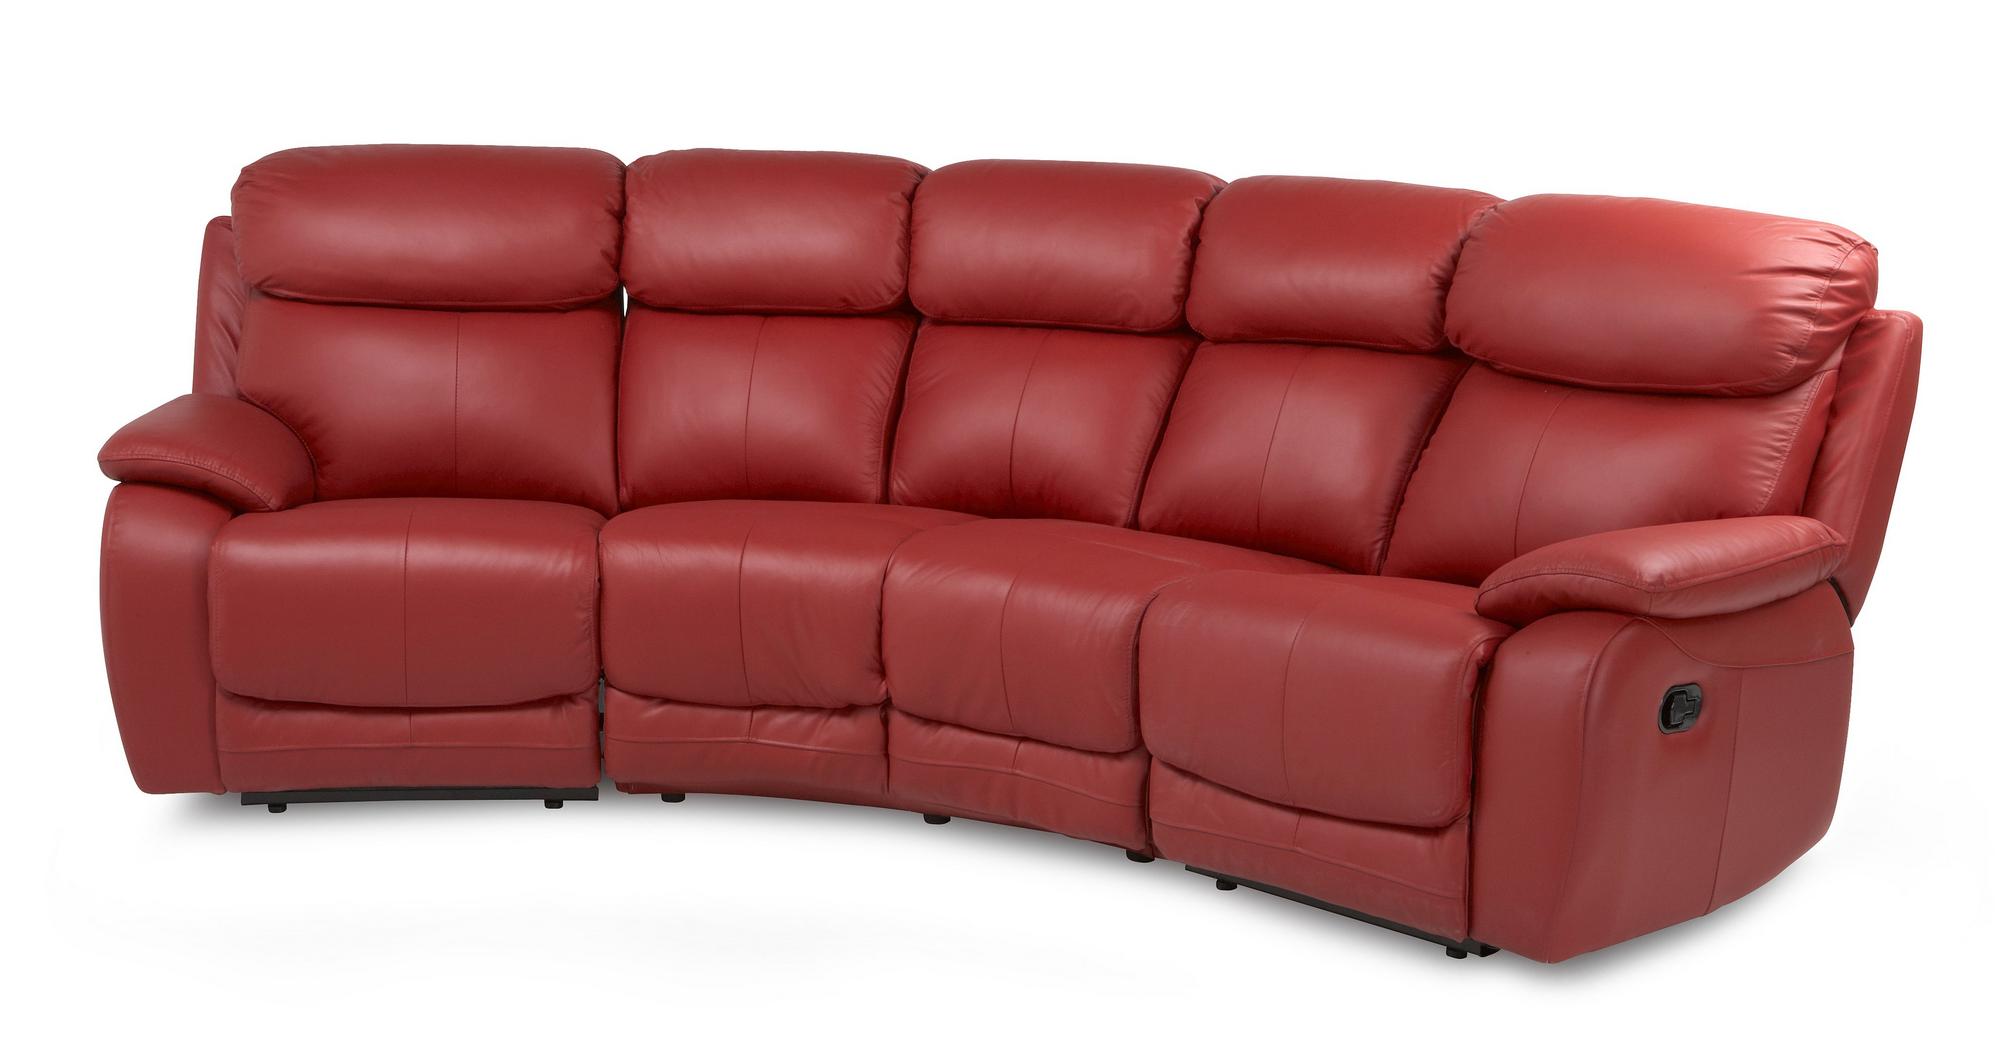 DFS Daytona Red 100% Leather Recliner Set Inc 4 Seater Curved Sofa